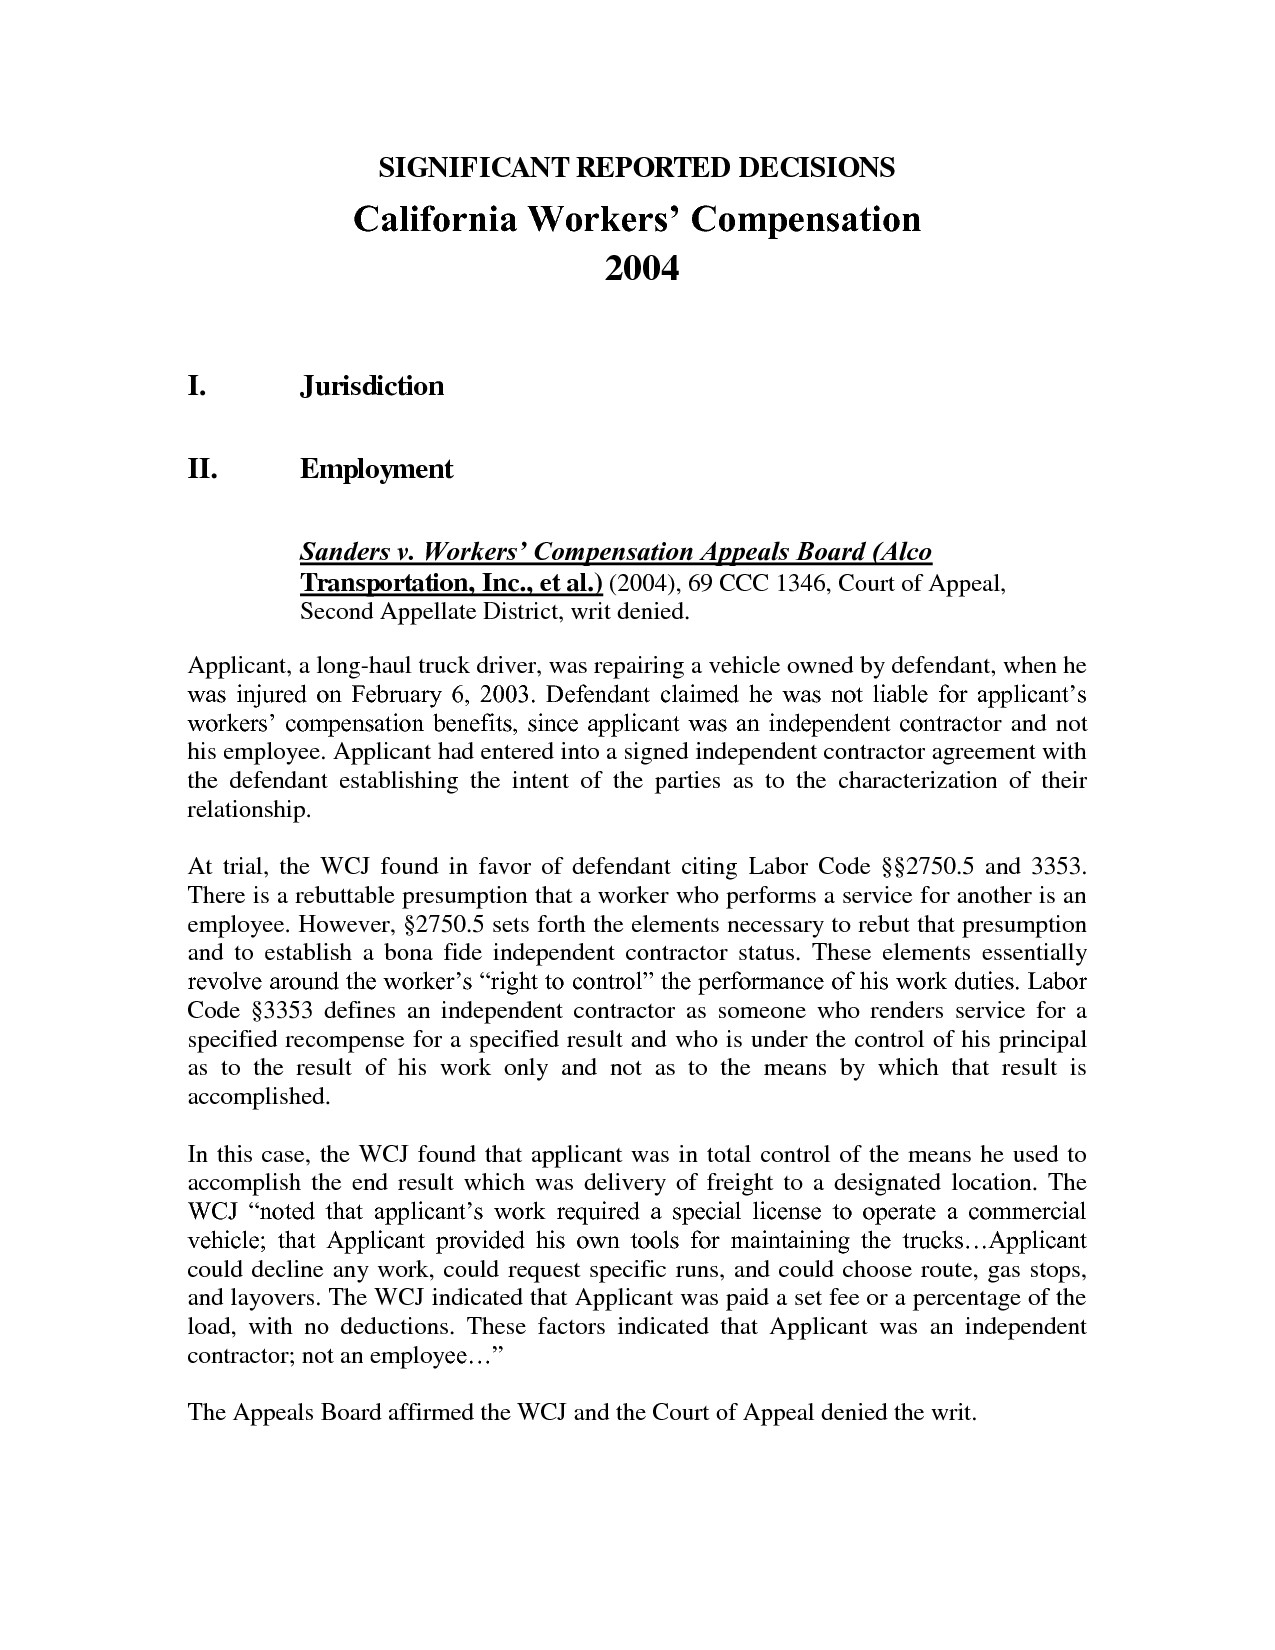 Workers Compensation Denial Letter Template - Certificate Employment with Pensation Sample Philippines Fresh